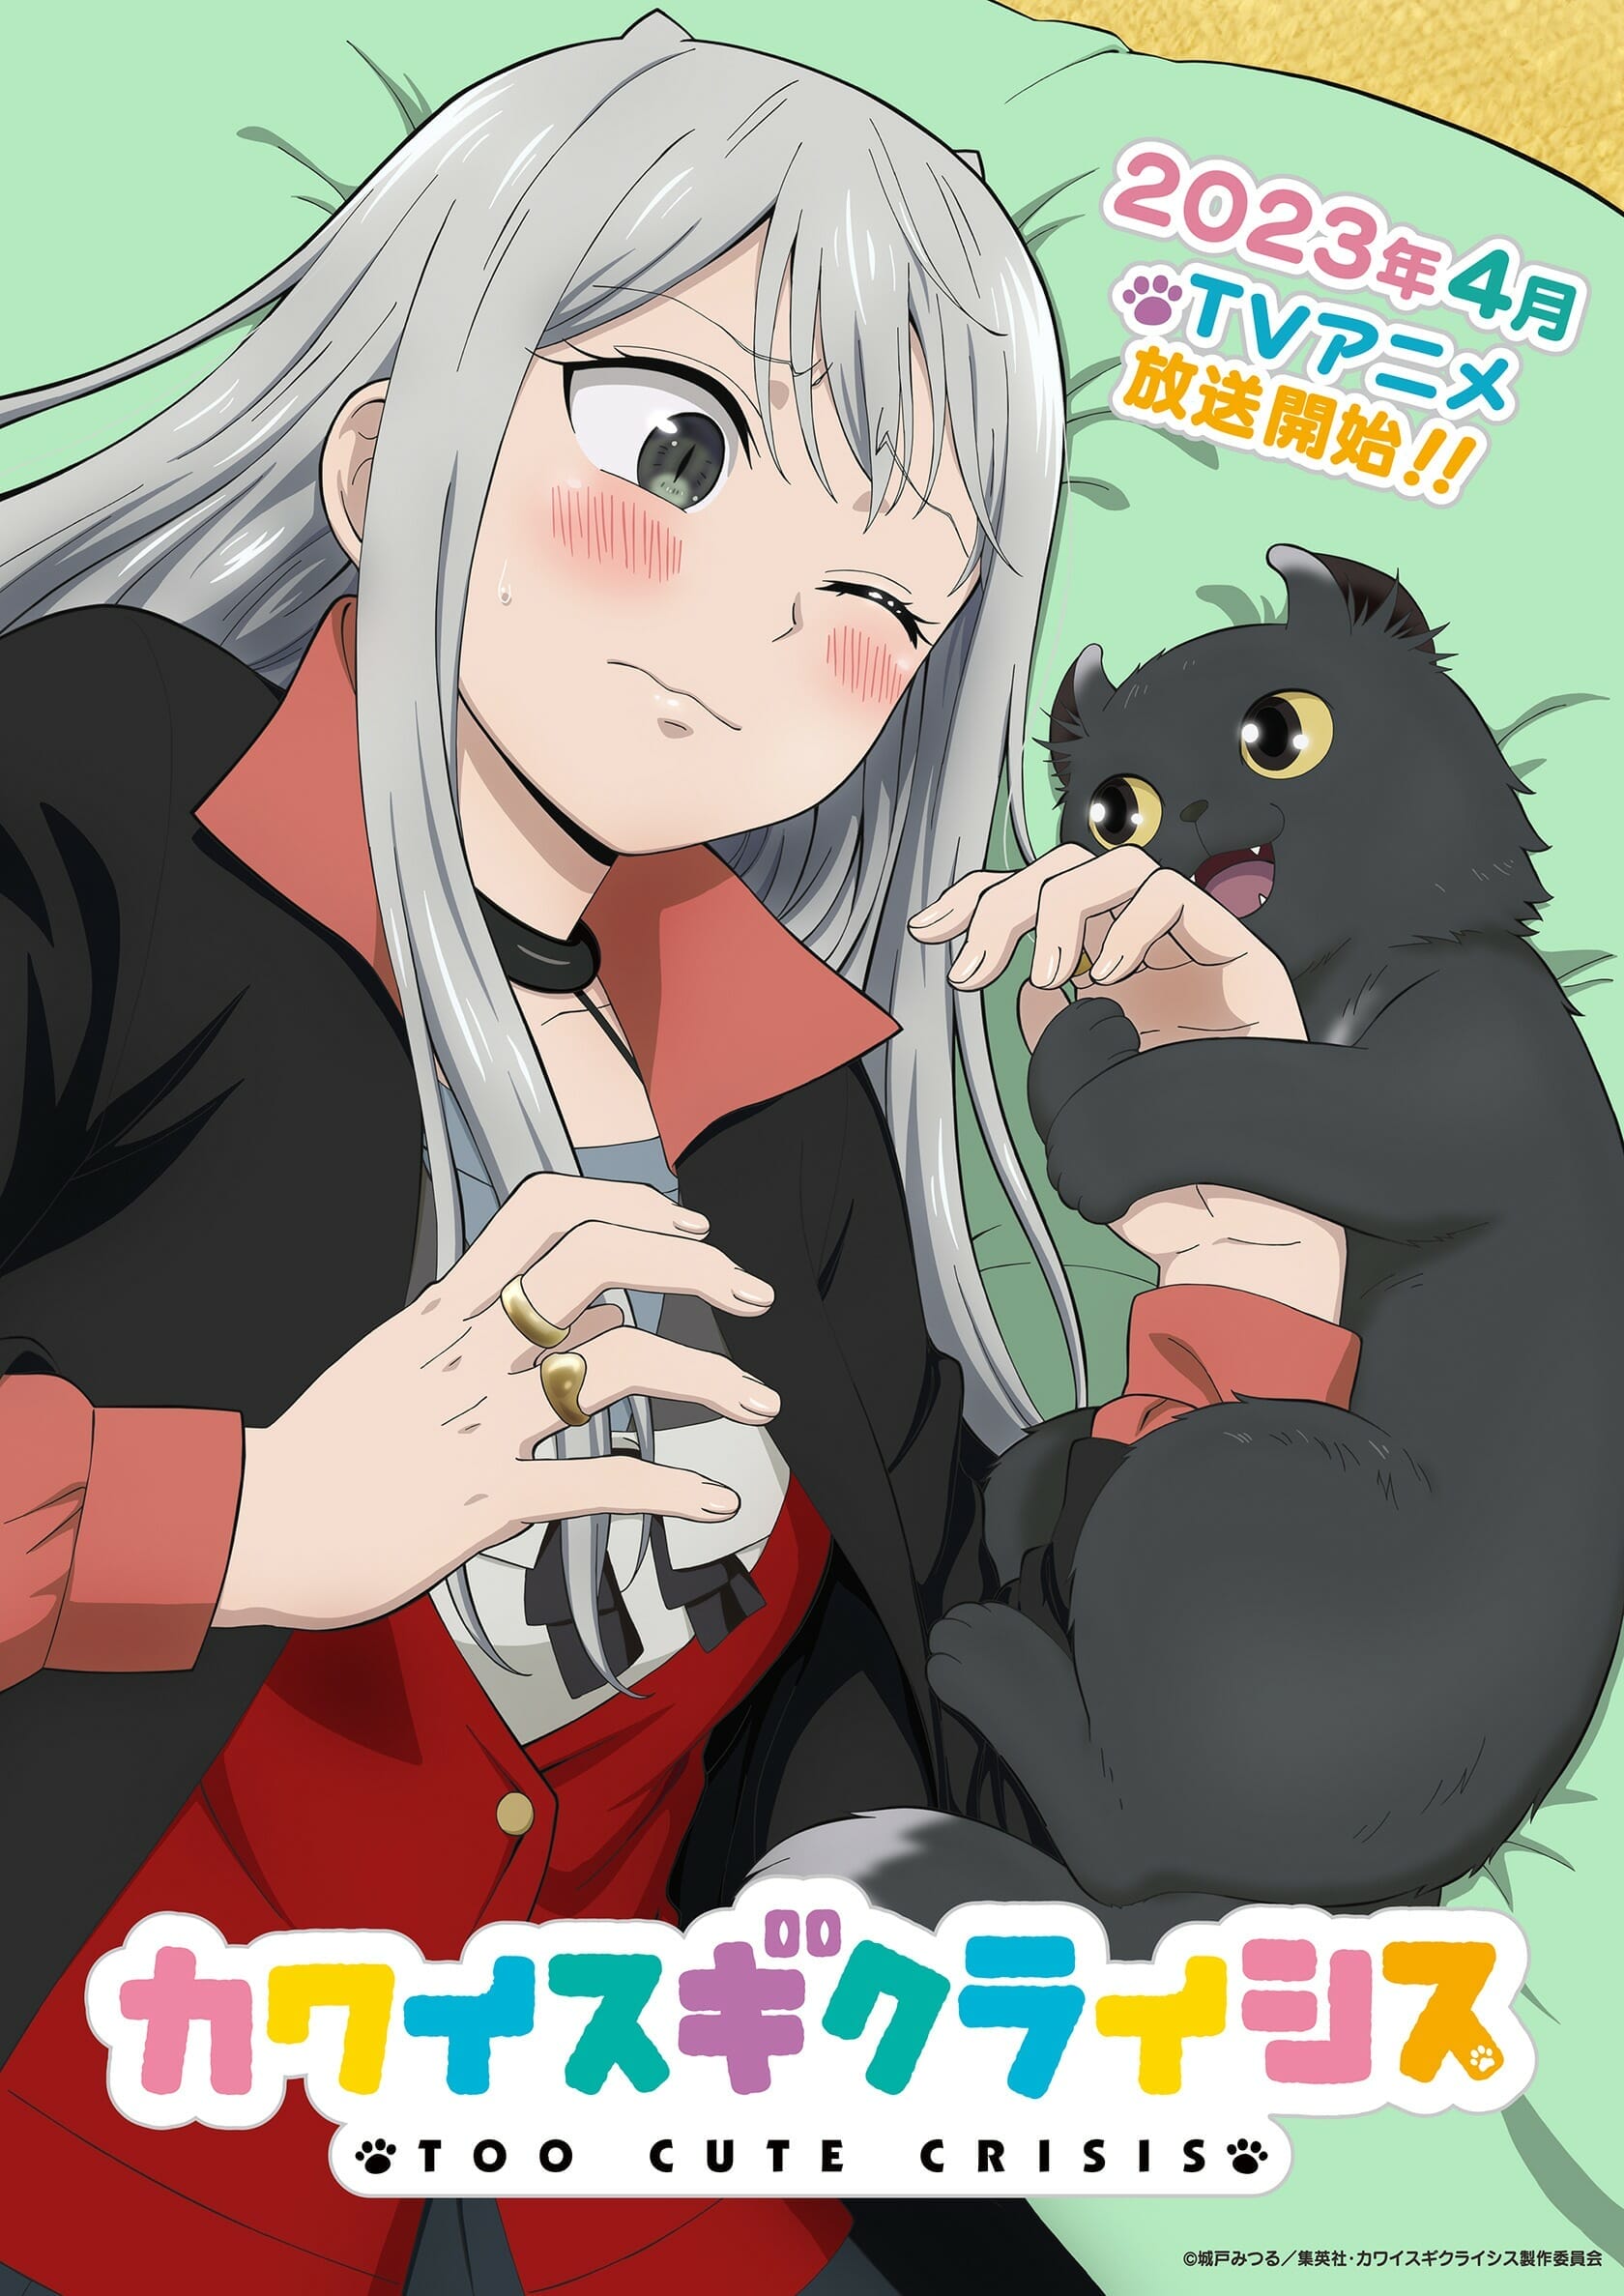 Too Cute Crisis character and cat poster